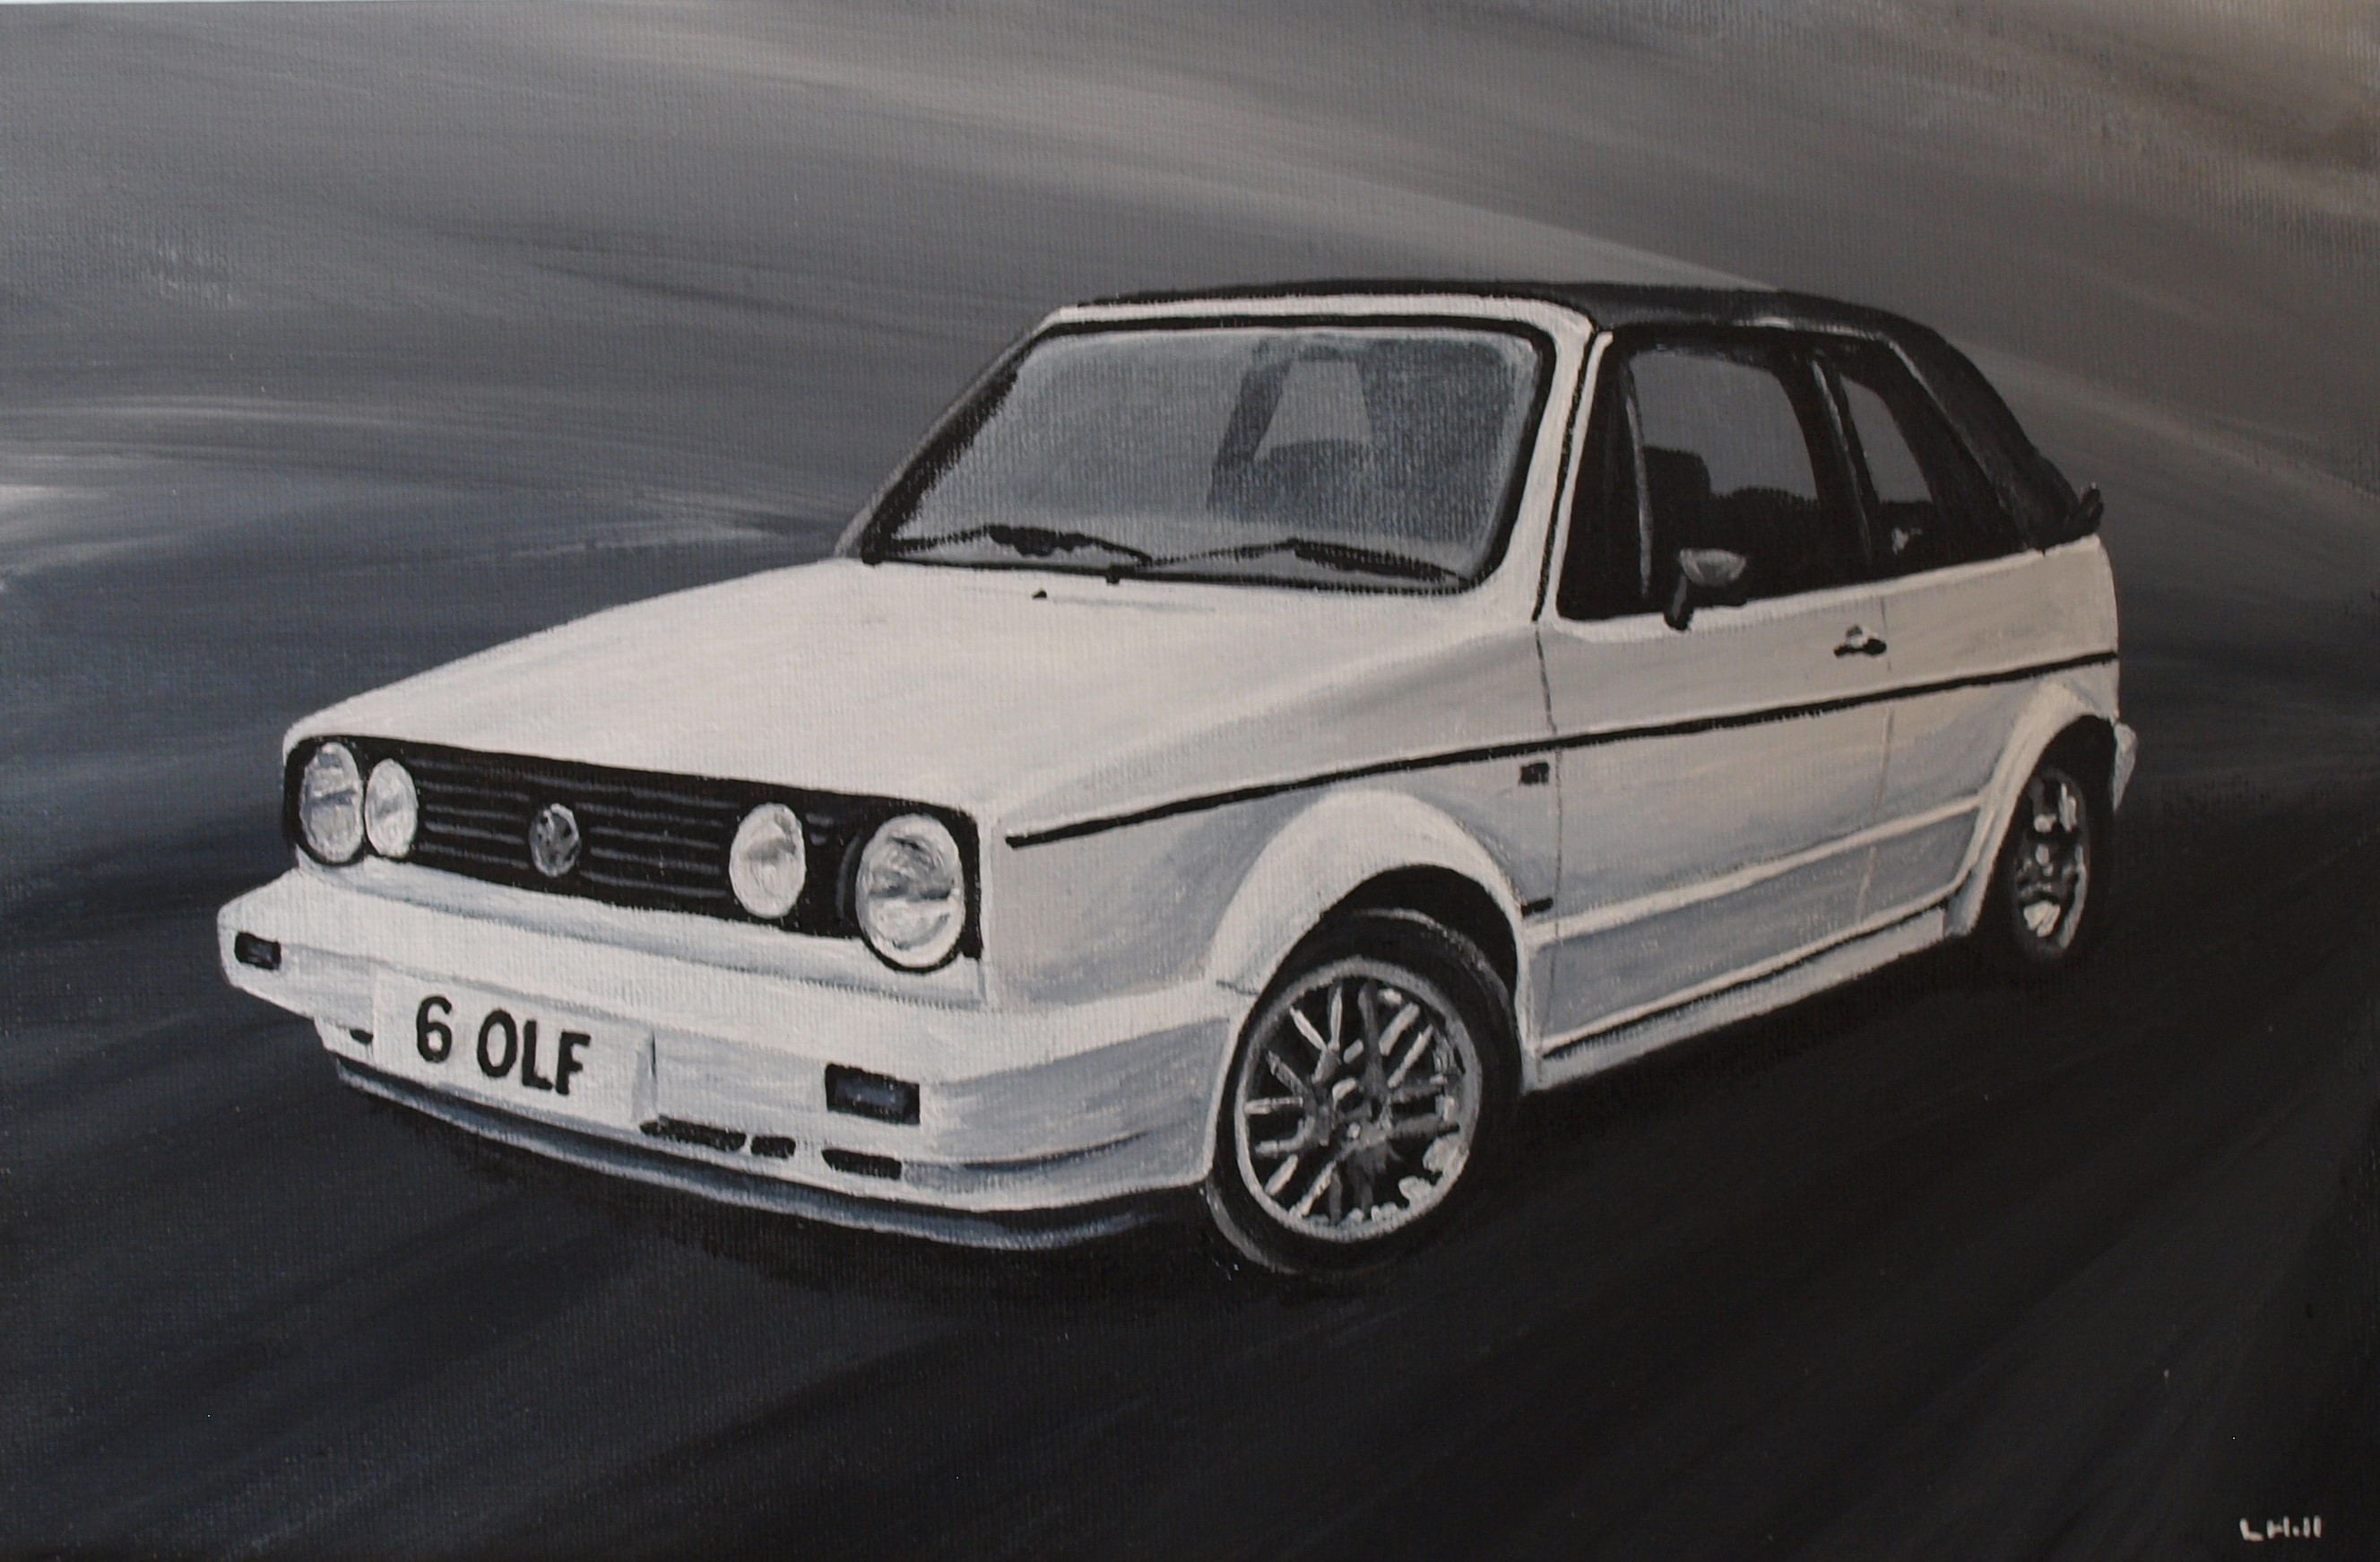 VW Golf pen and ink illustration by Louisa Hill